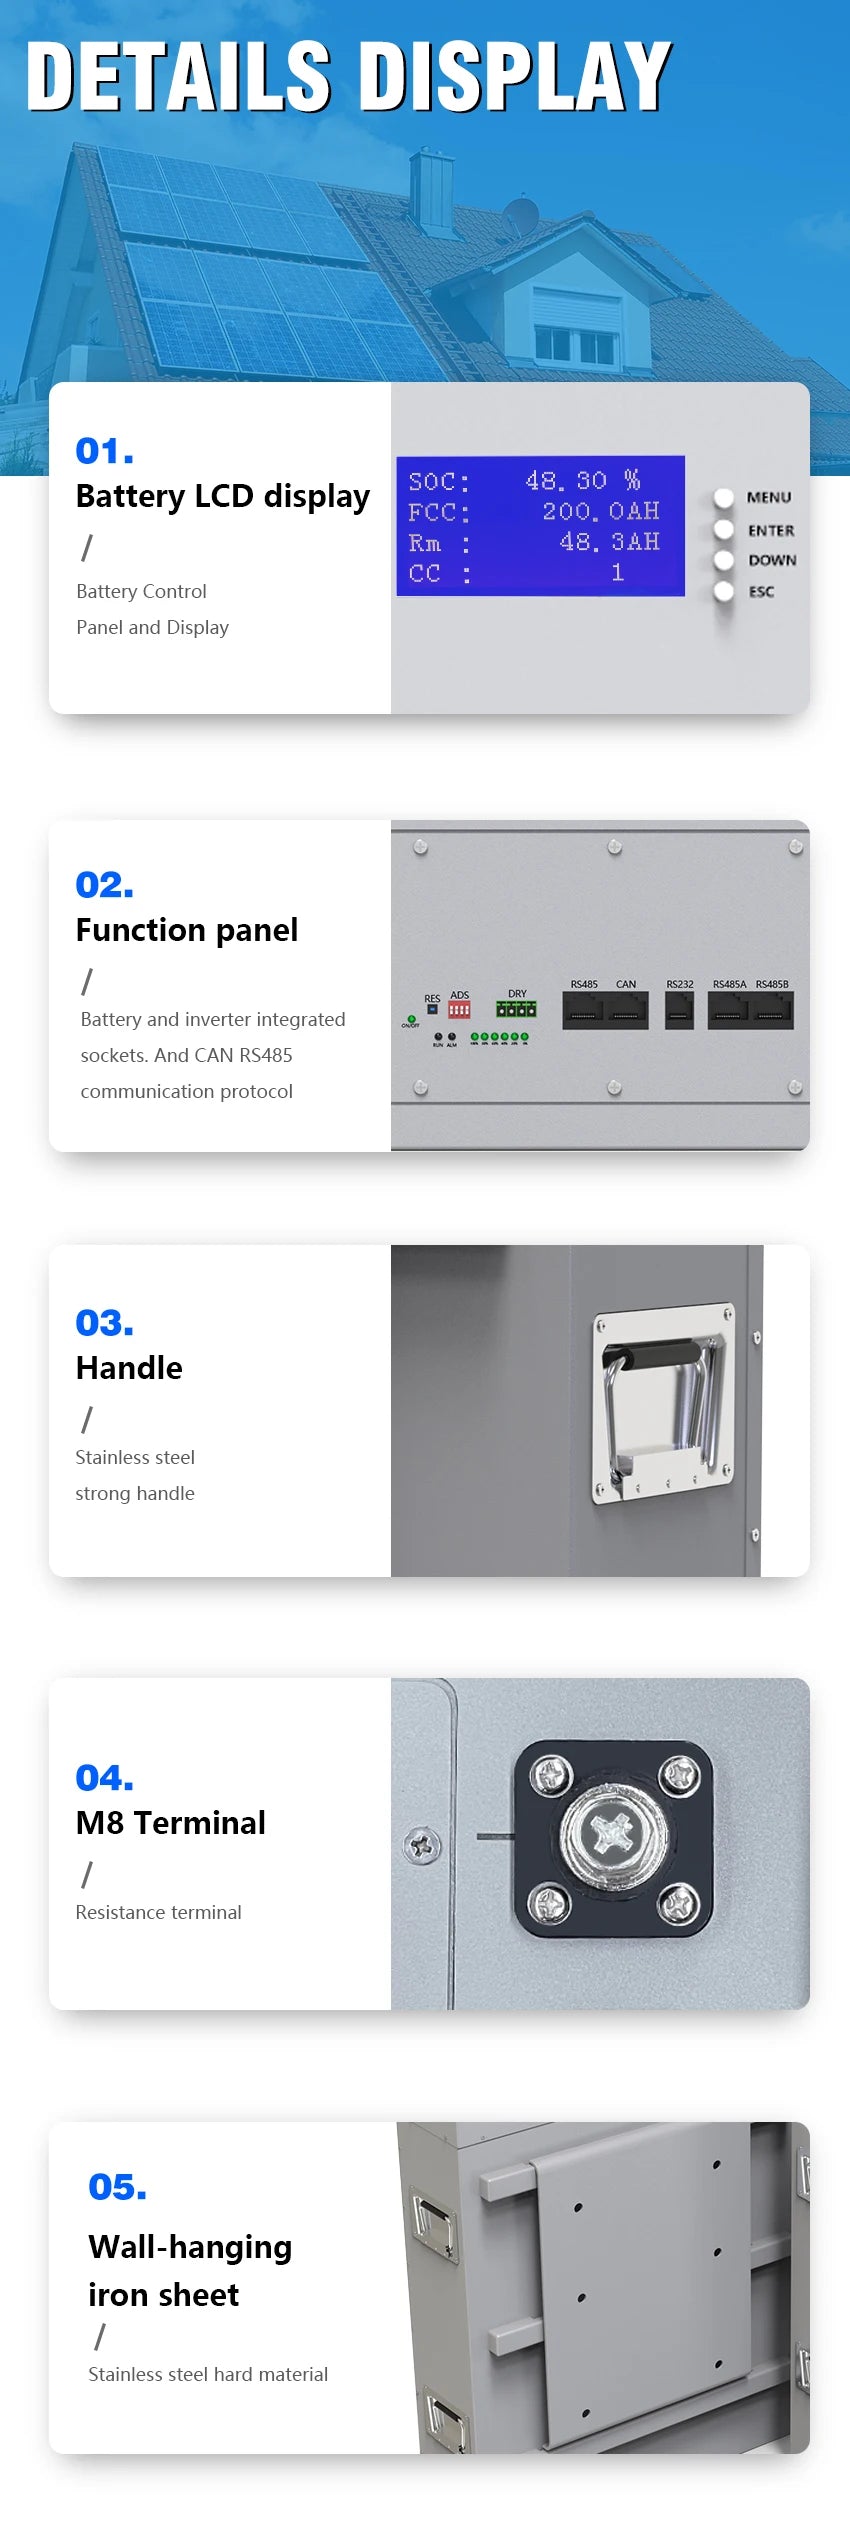 Powerwall 48V 200AH 10KW LiFePO4 Batttery Pack, Powerwall: LCD display shows state-of-charge, 200Ah capacity, 48V output, and installation-friendly features.